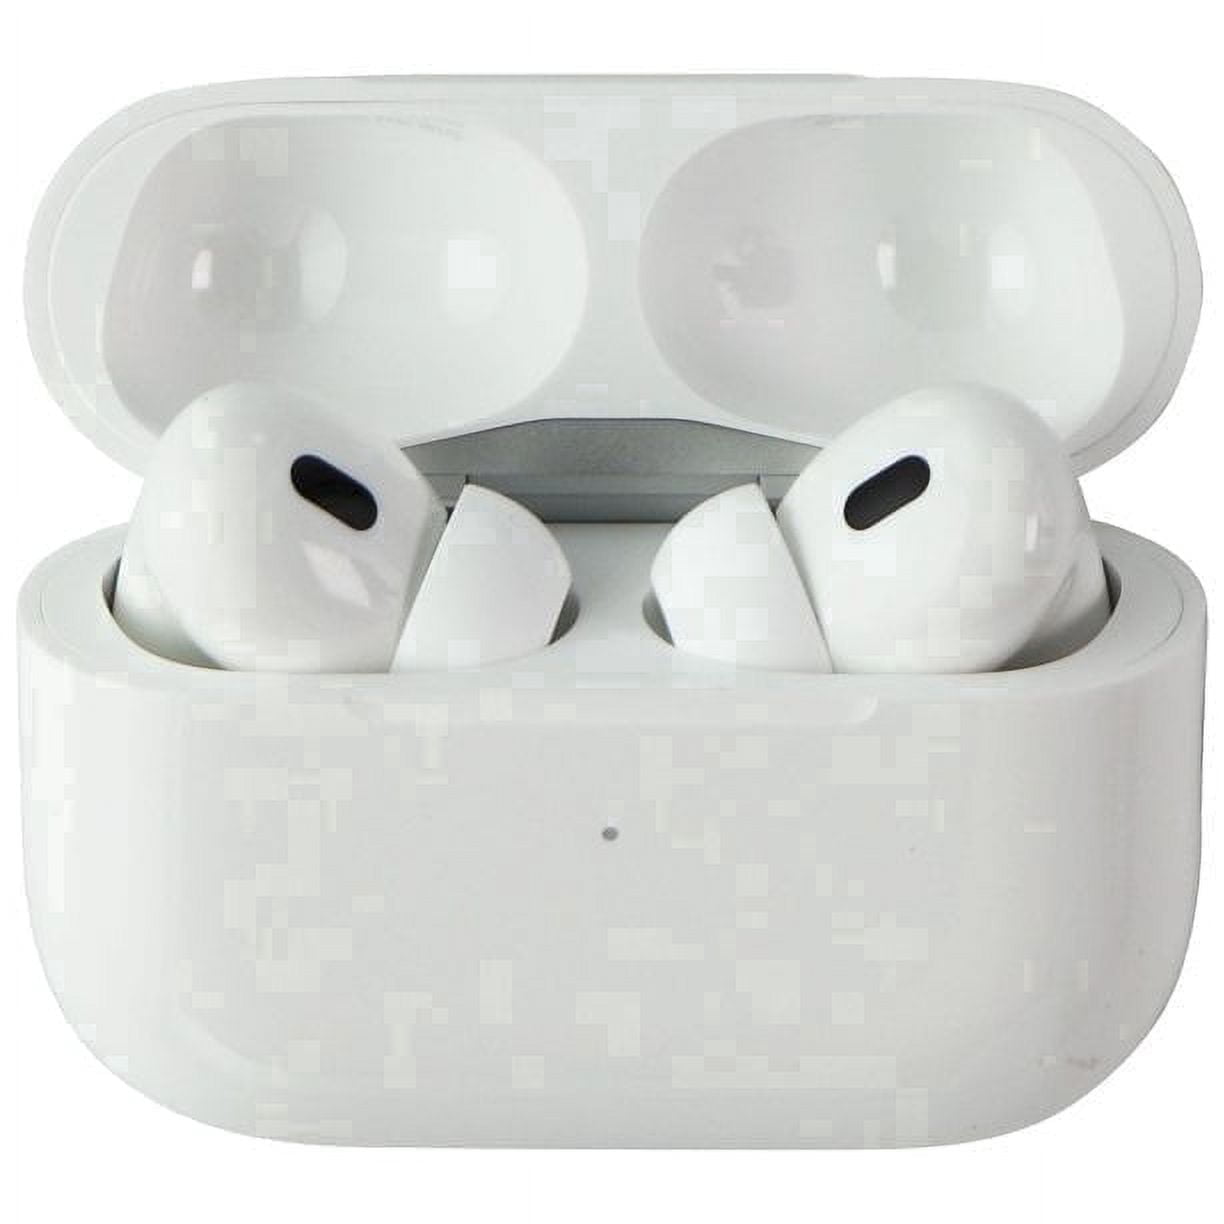 Apple AirPods Pro (2nd Gen) Wireless Earbuds with MagSafe Charging Case  (Used) 